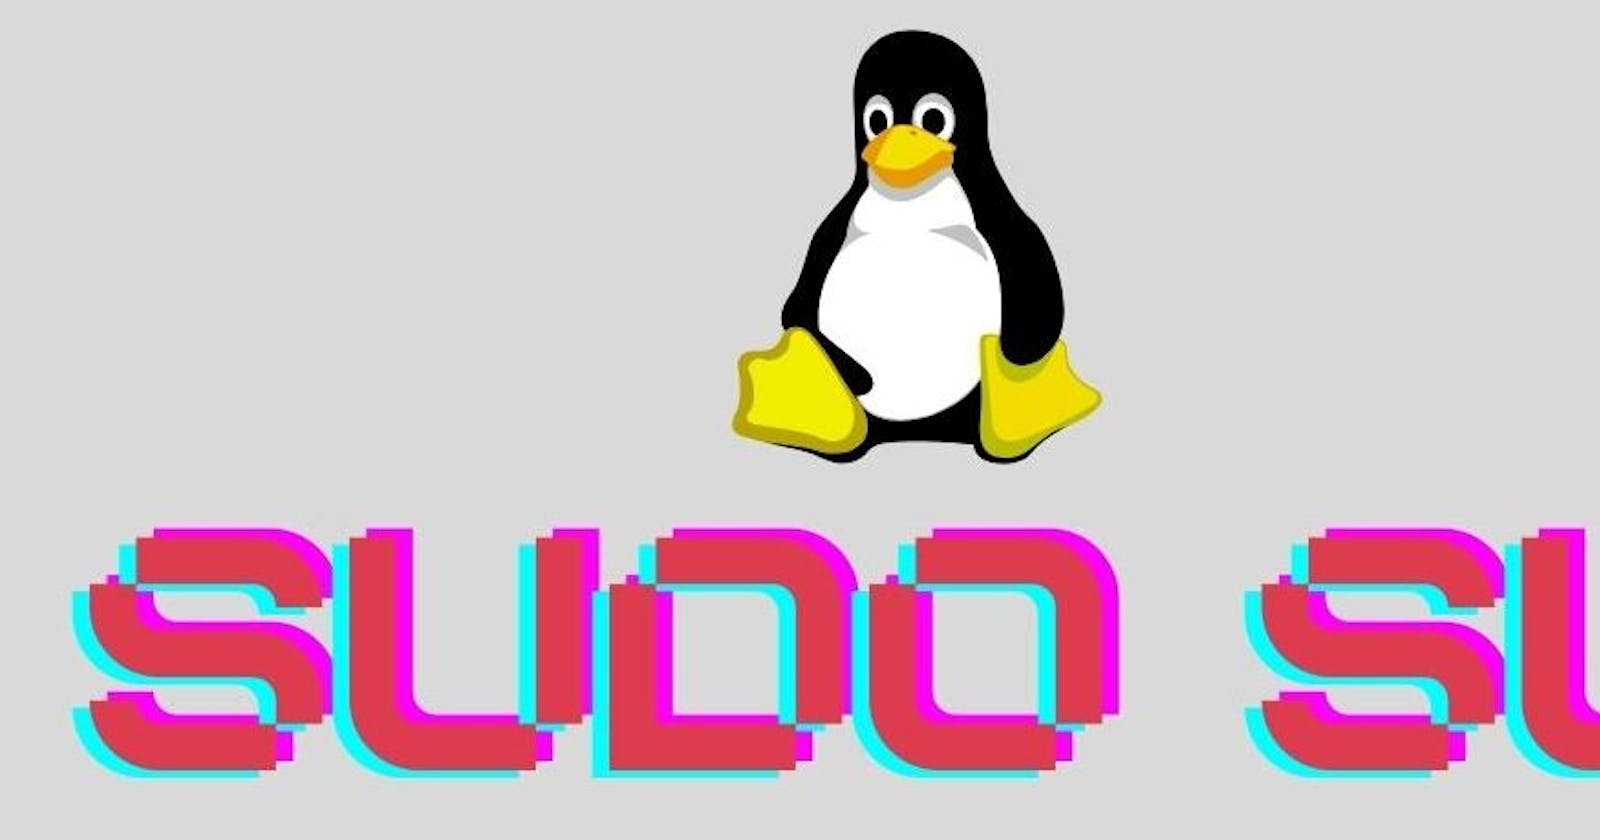 Linux System Administrator